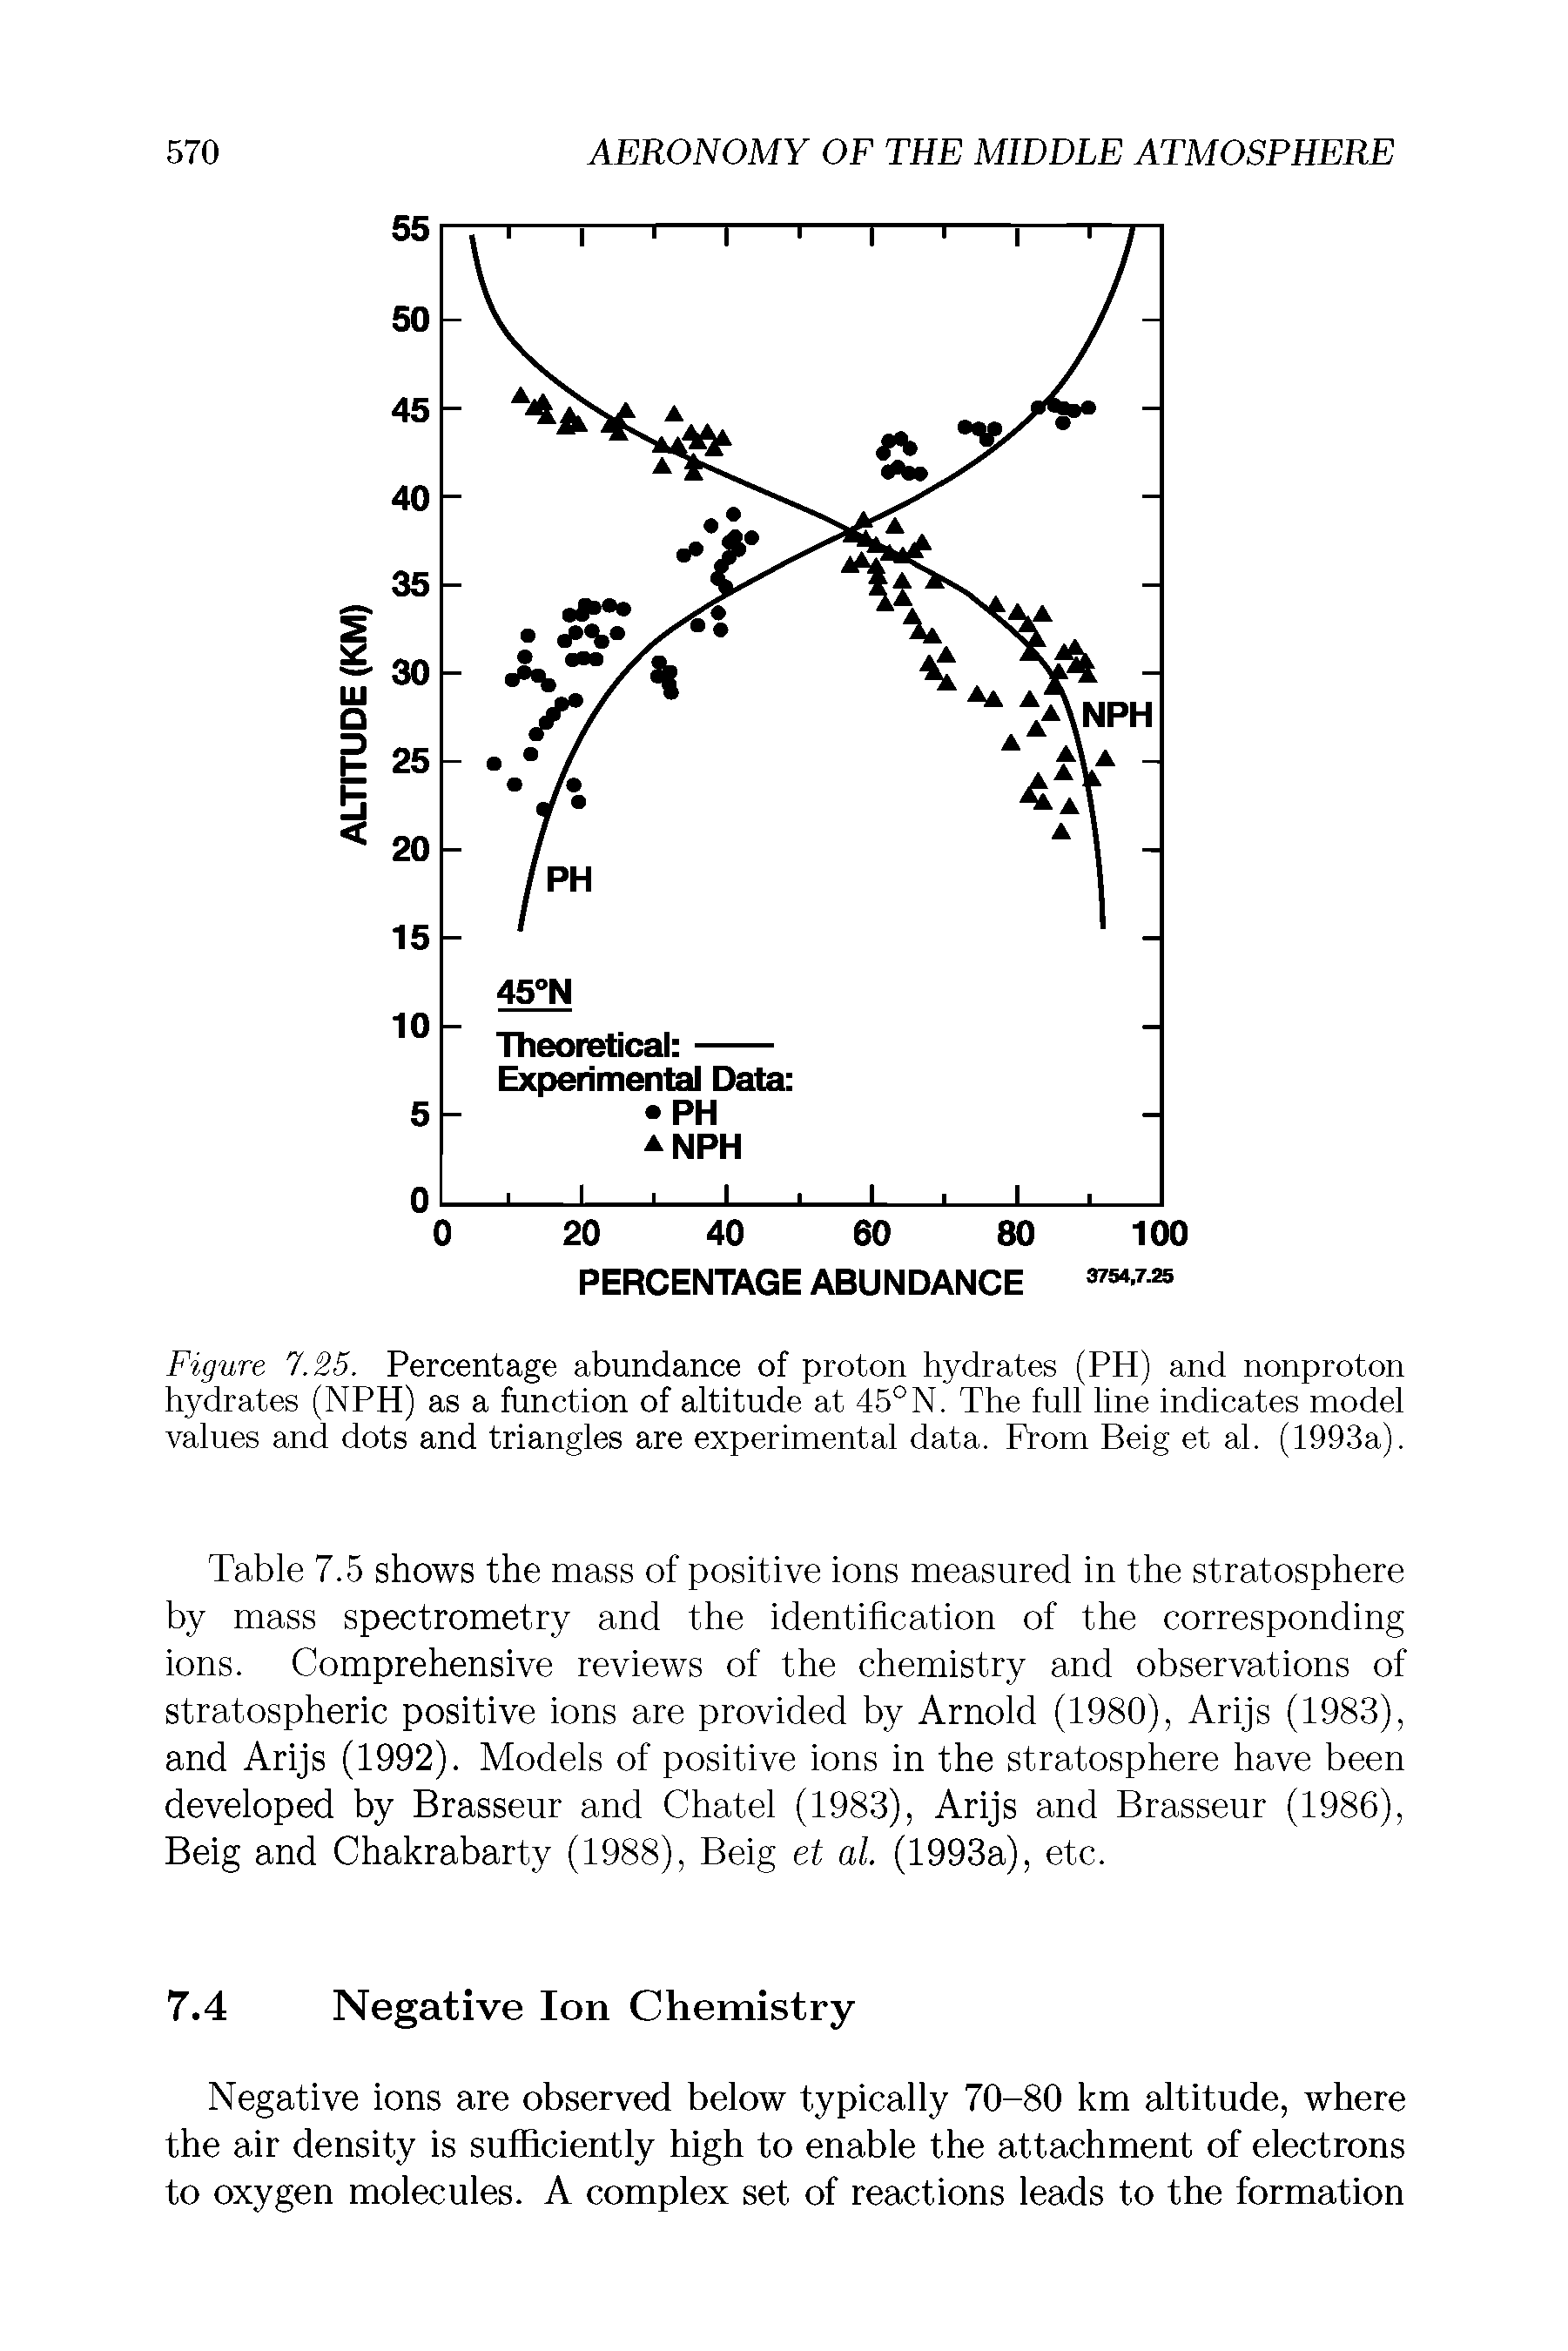 Figure 7.25. Percentage abundance of proton hydrates (PH) and nonproton hydrates (NPH) as a function of altitude at 45°N. The full line indicates model values and dots and triangles are experimental data. From Beig et al. (1993a).